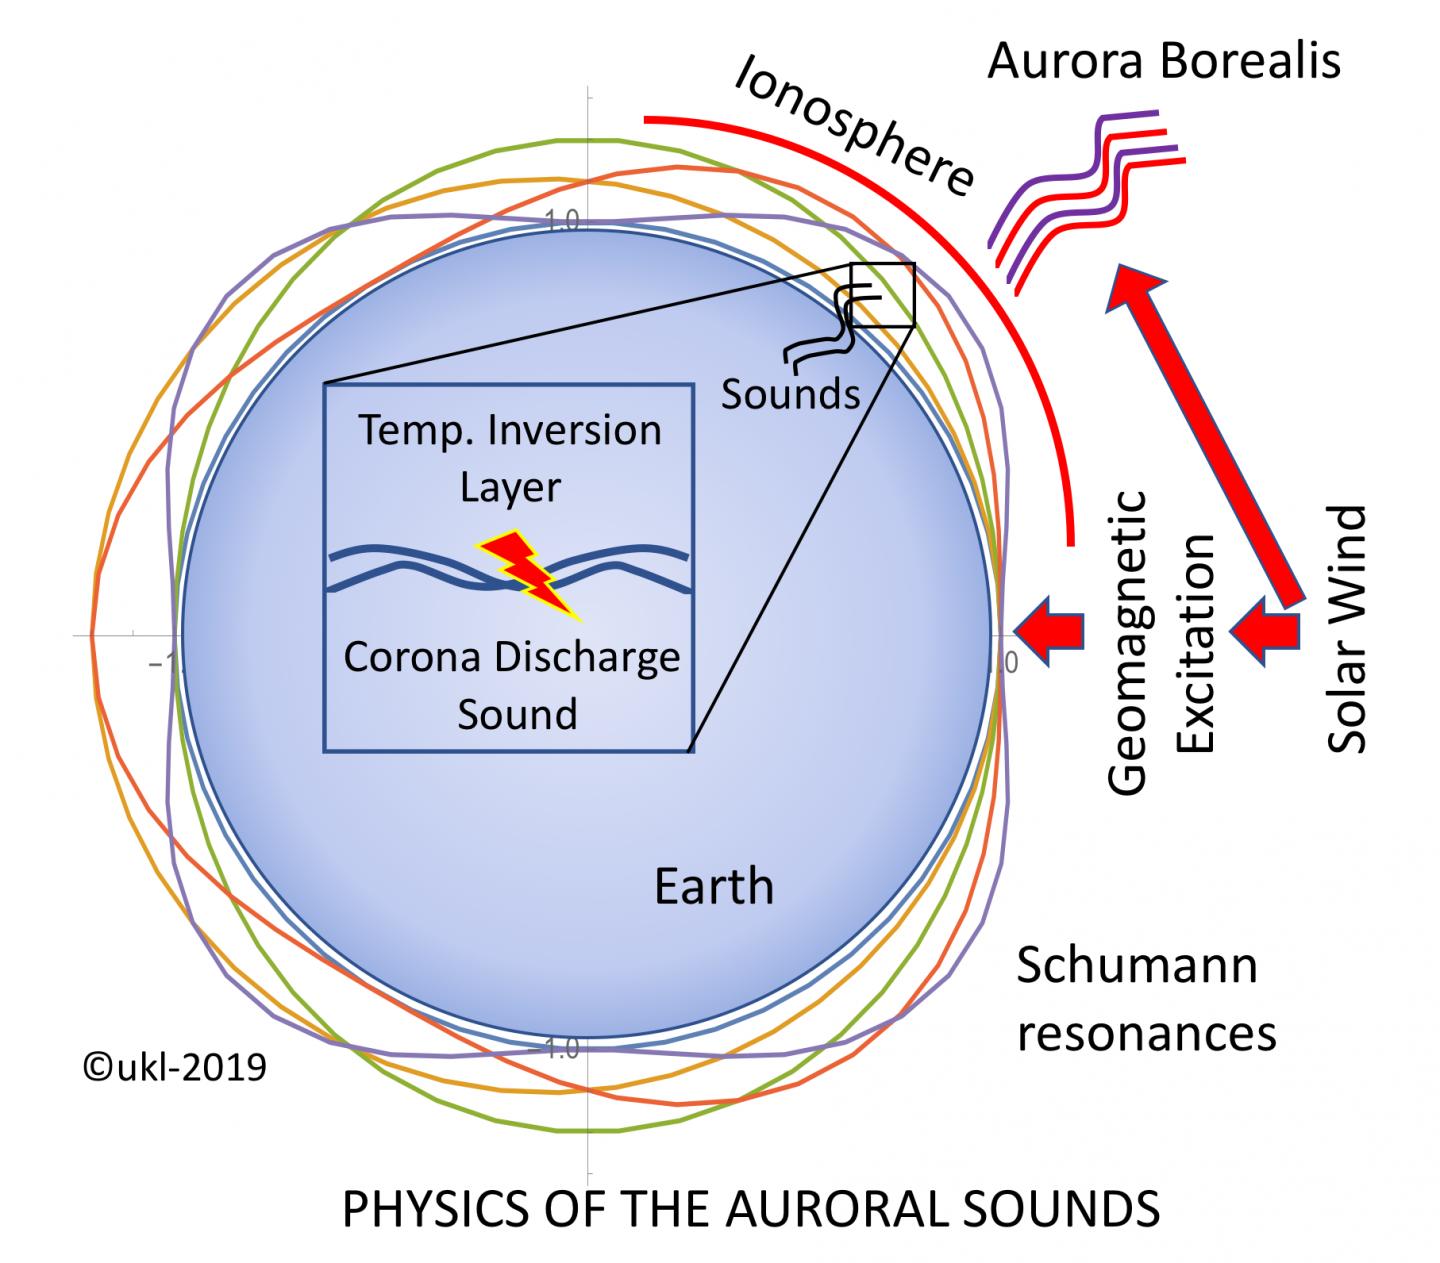 Physics of Auroral Sounds